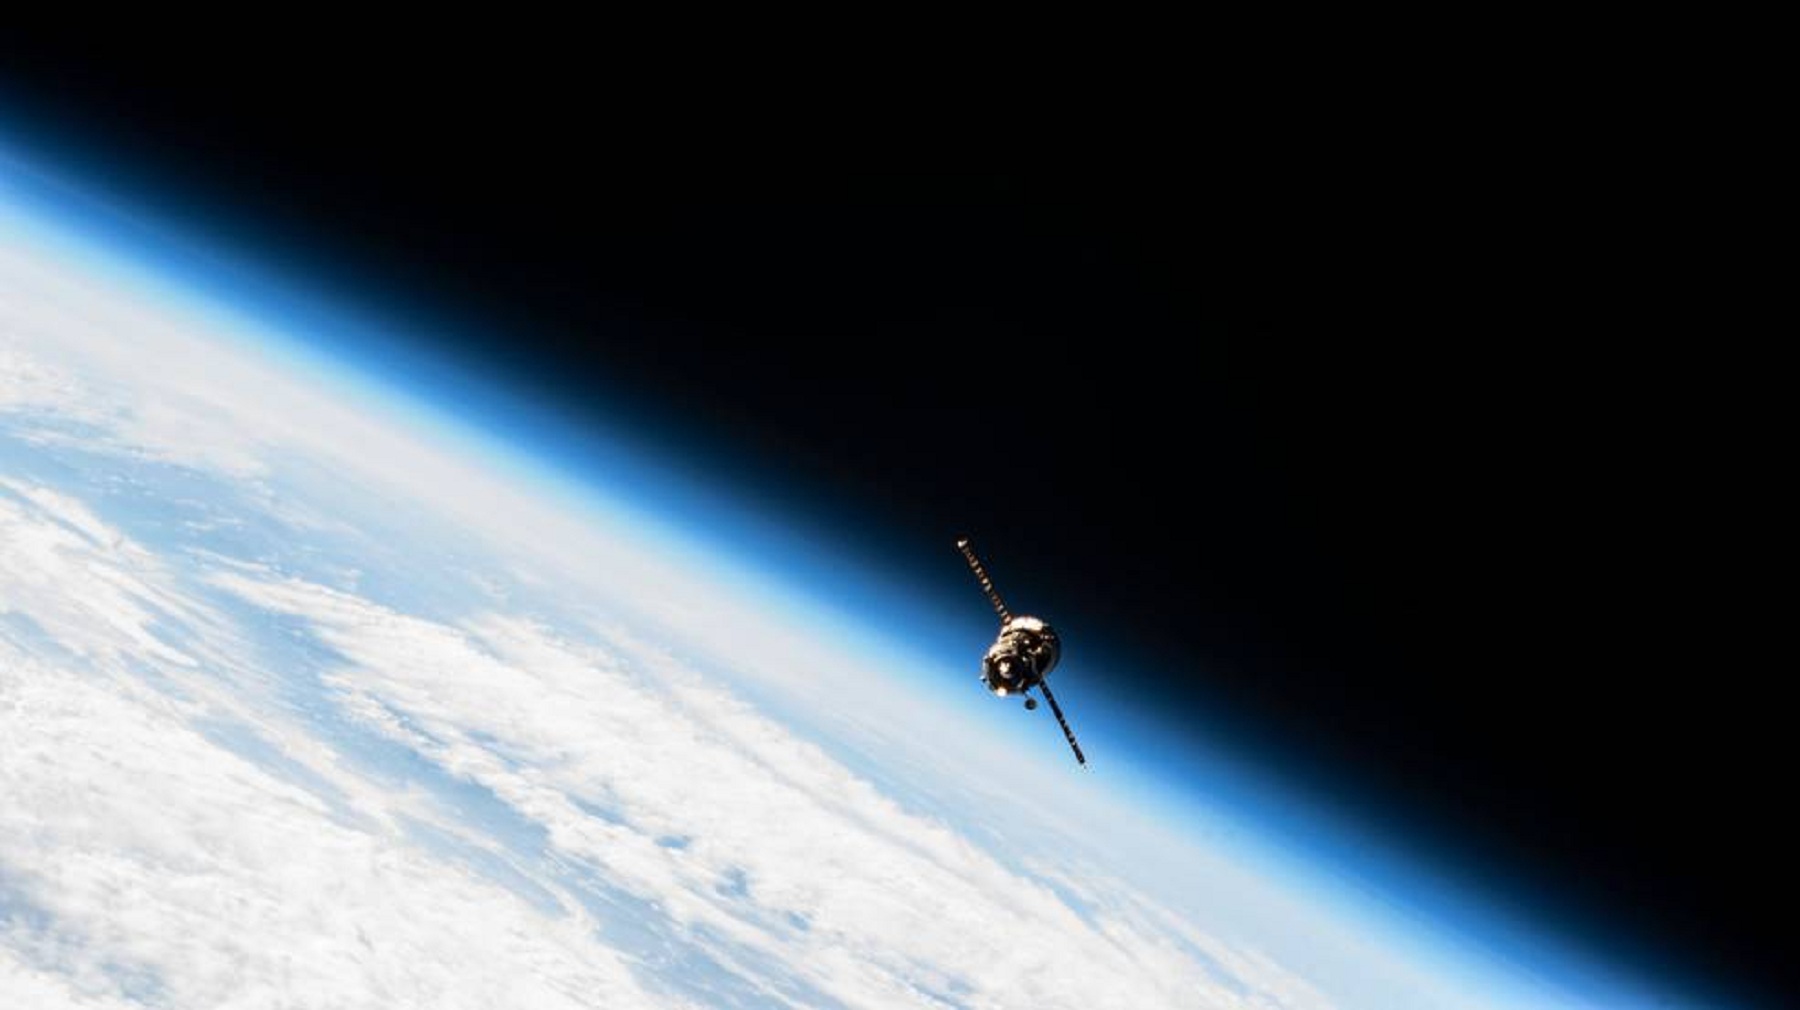 NASA to Provide Live Coverage of Space Station Cargo Launch, Docking